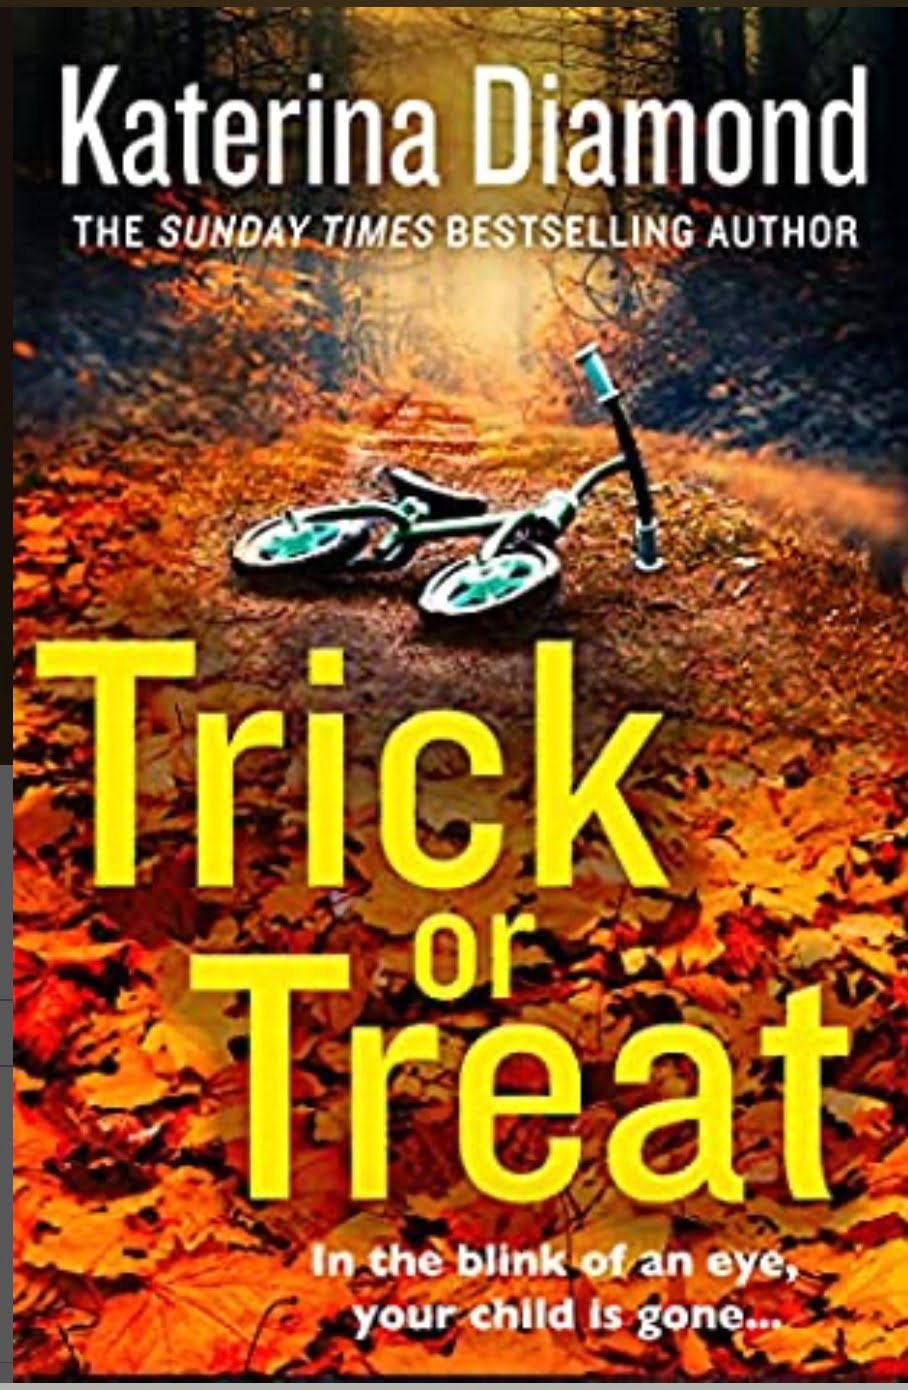 TRICK OR TREAT BY KATERINA DIAMOND – BOOK REVIEW